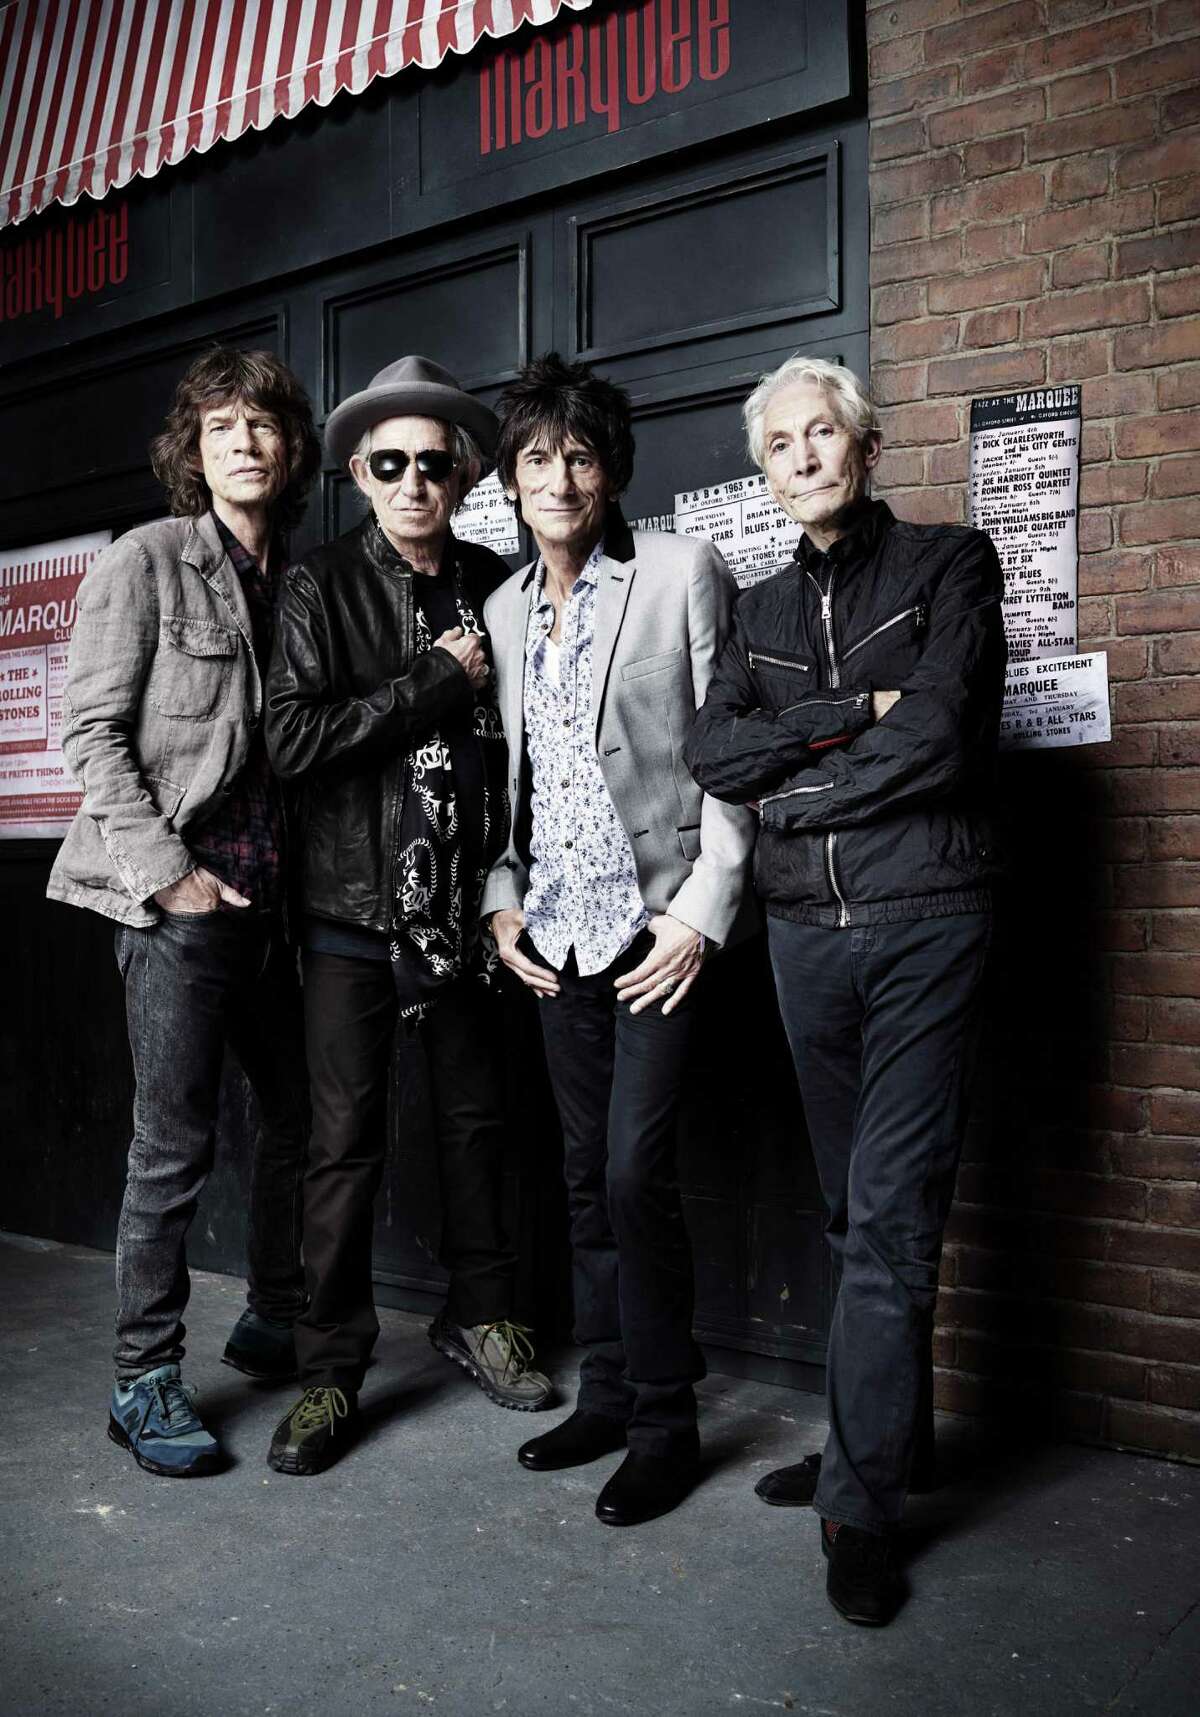 In this image made available by Rankin, and dated July 11, 2012, showing the rock band the Rolling Stones, with left to right, Mick Jagger, Keith Richards, Ronnie Wood and Charlie Watts, issued Thursday July 12, 2012, as issued to mark the 50th anniversary of their first ever live performance on 12 July 1962 at the Marquee club in London. The group played their first show at the club on July 12, 1962, under the name The Rollin' Stones, hastily chosen as the band's name from a song by their blues hero Muddy Waters. (AP Photo / Rankin) NO SALES